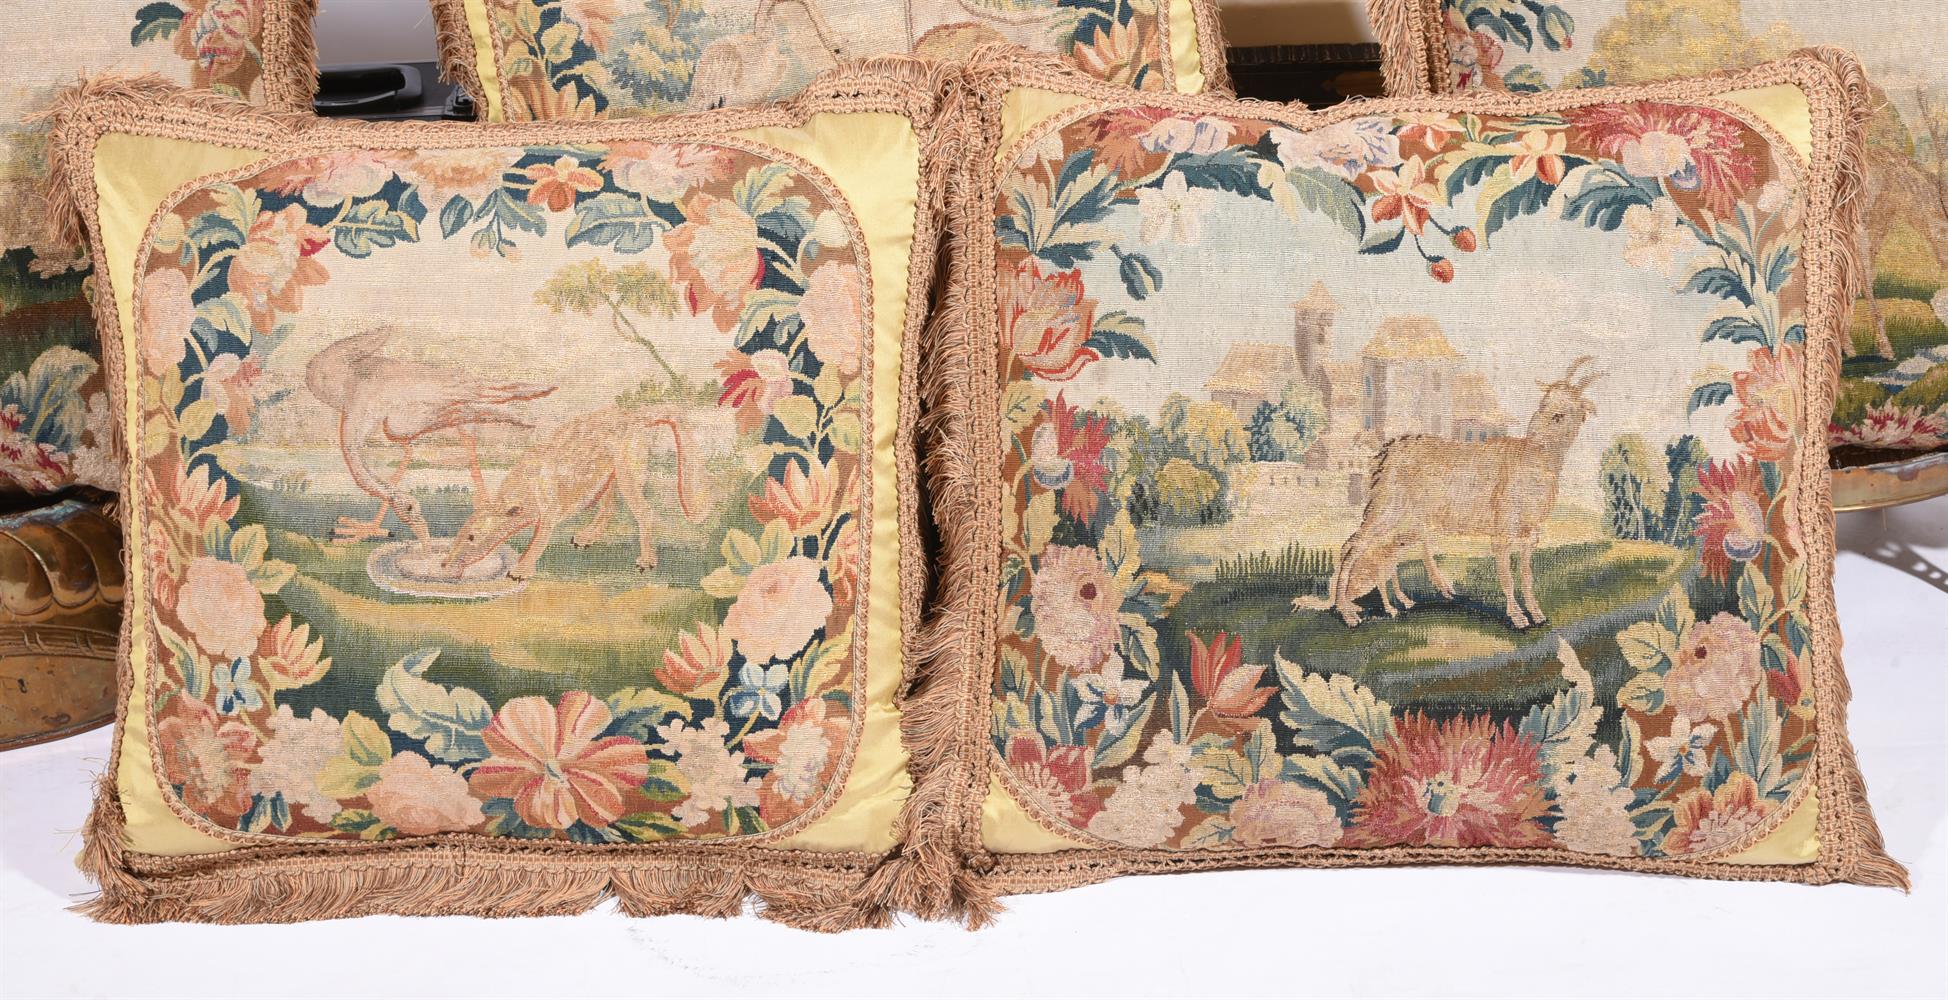 SIX LARGE CUSHIONSINCORPORATING 18TH CENTURY TAPESTRY WITH ANIMALS FROM FABLES AND LATER FABRIC - Image 3 of 4